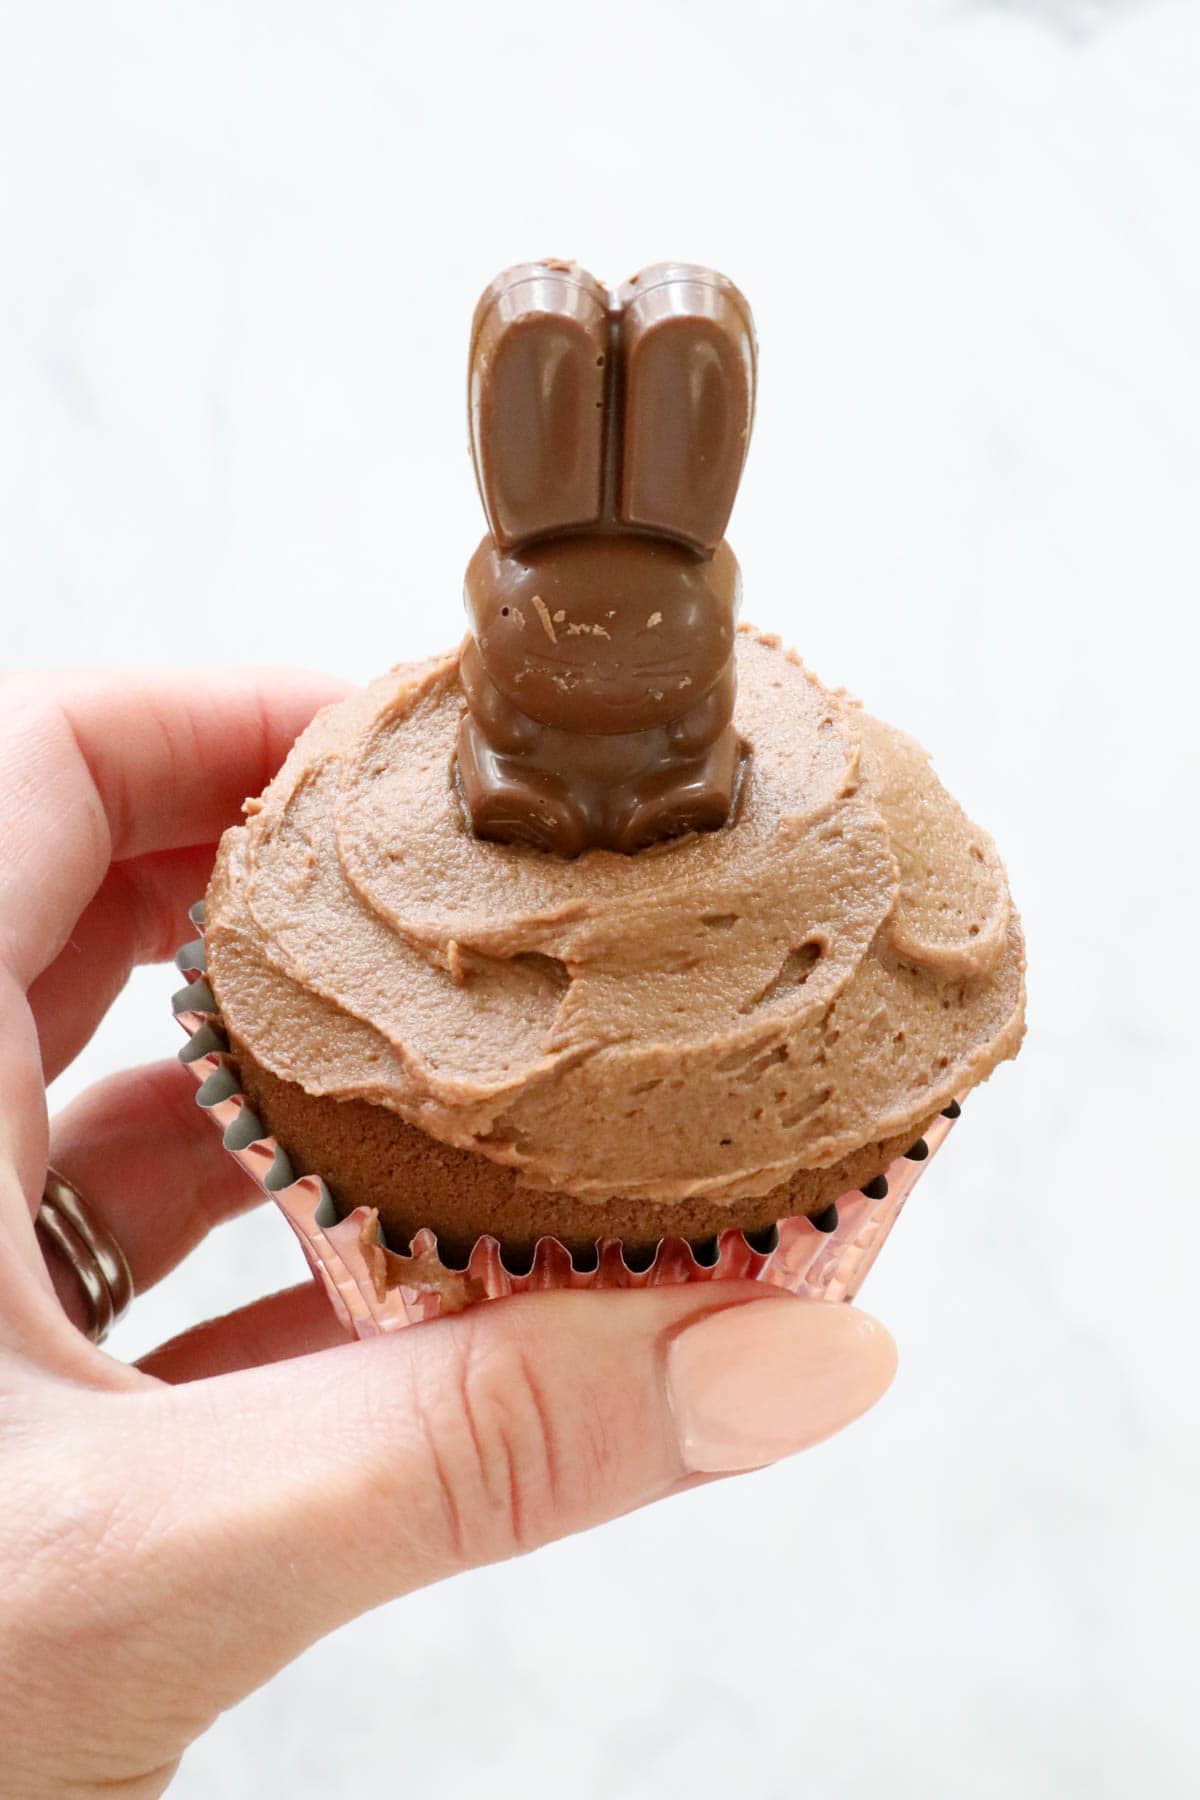 A hand holding an Easter cupcake with a chocolate bunny on top.